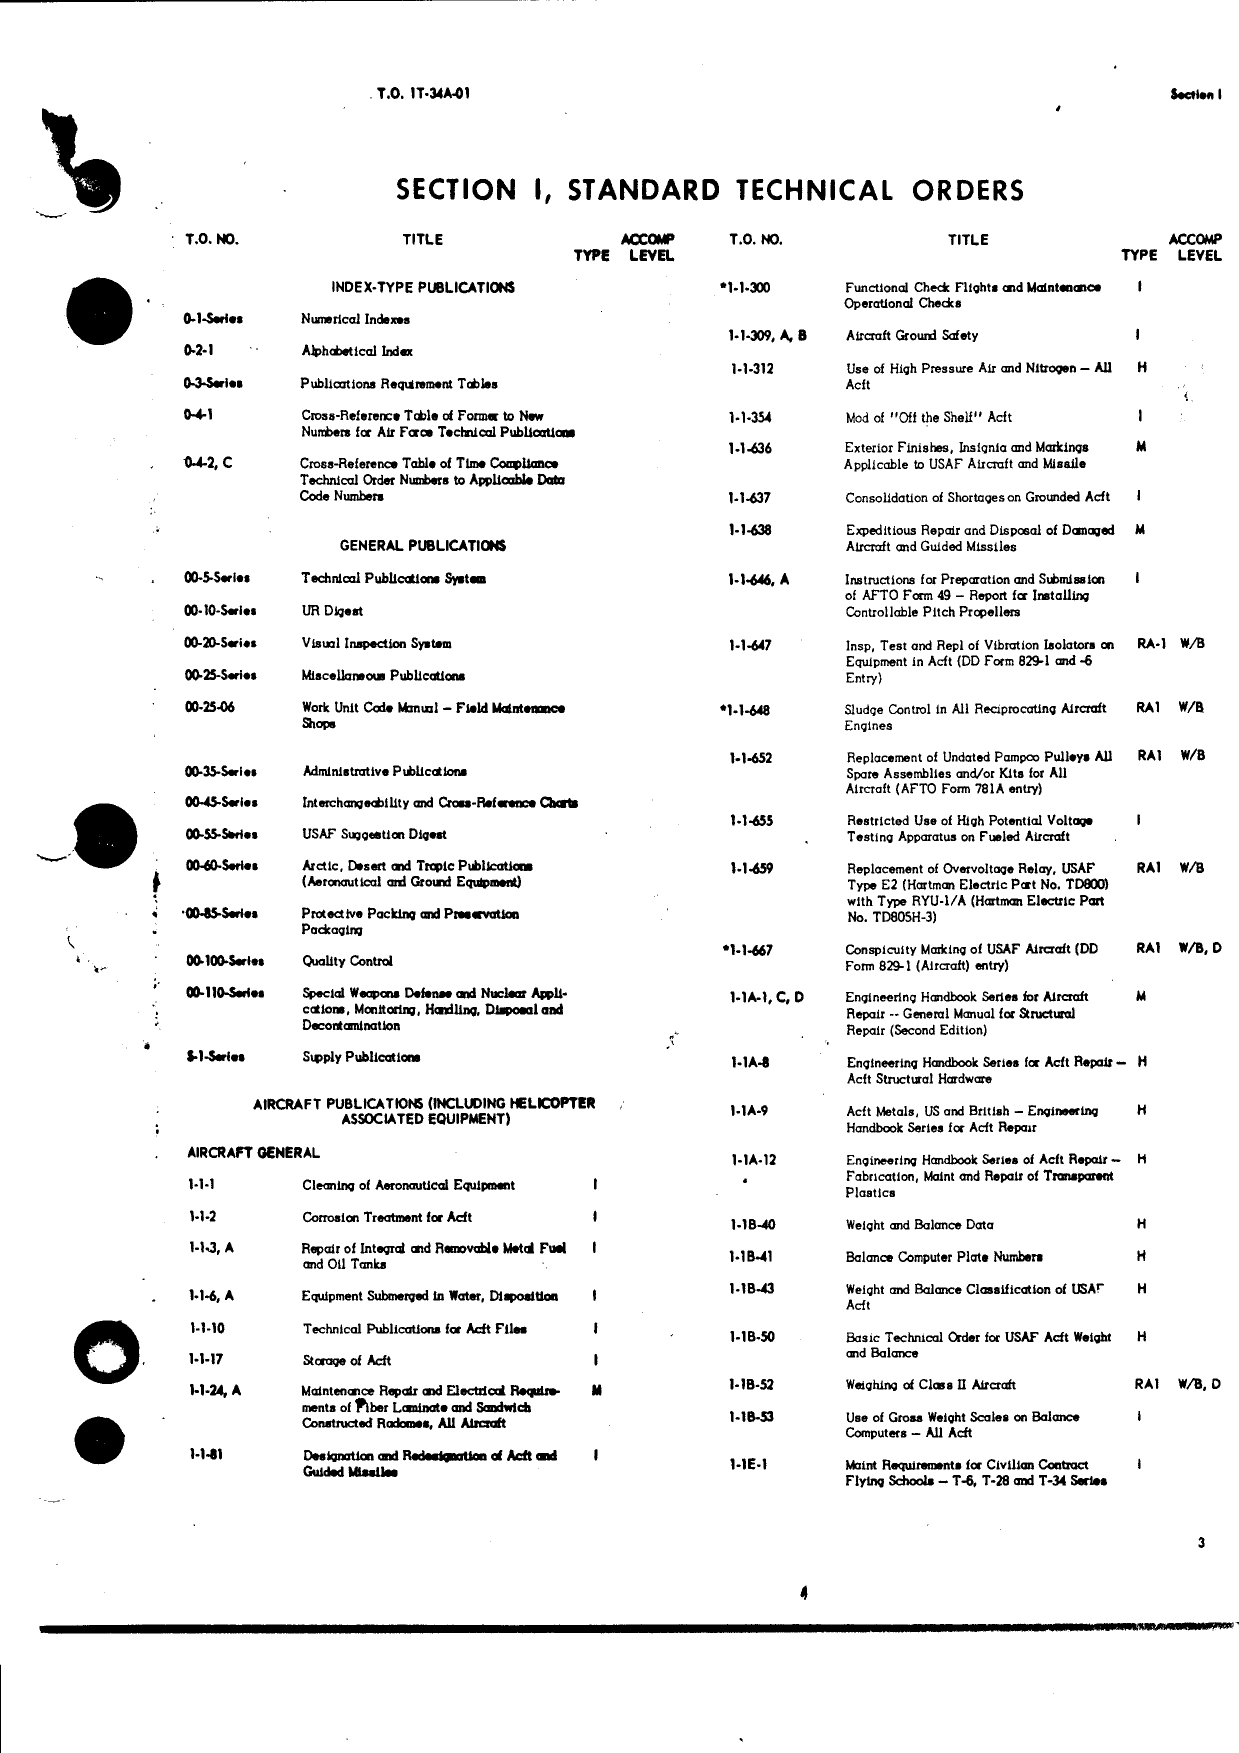 Sample page 3 from AirCorps Library document: List of Applicable Publications for T-34A Aircraft and Equipment